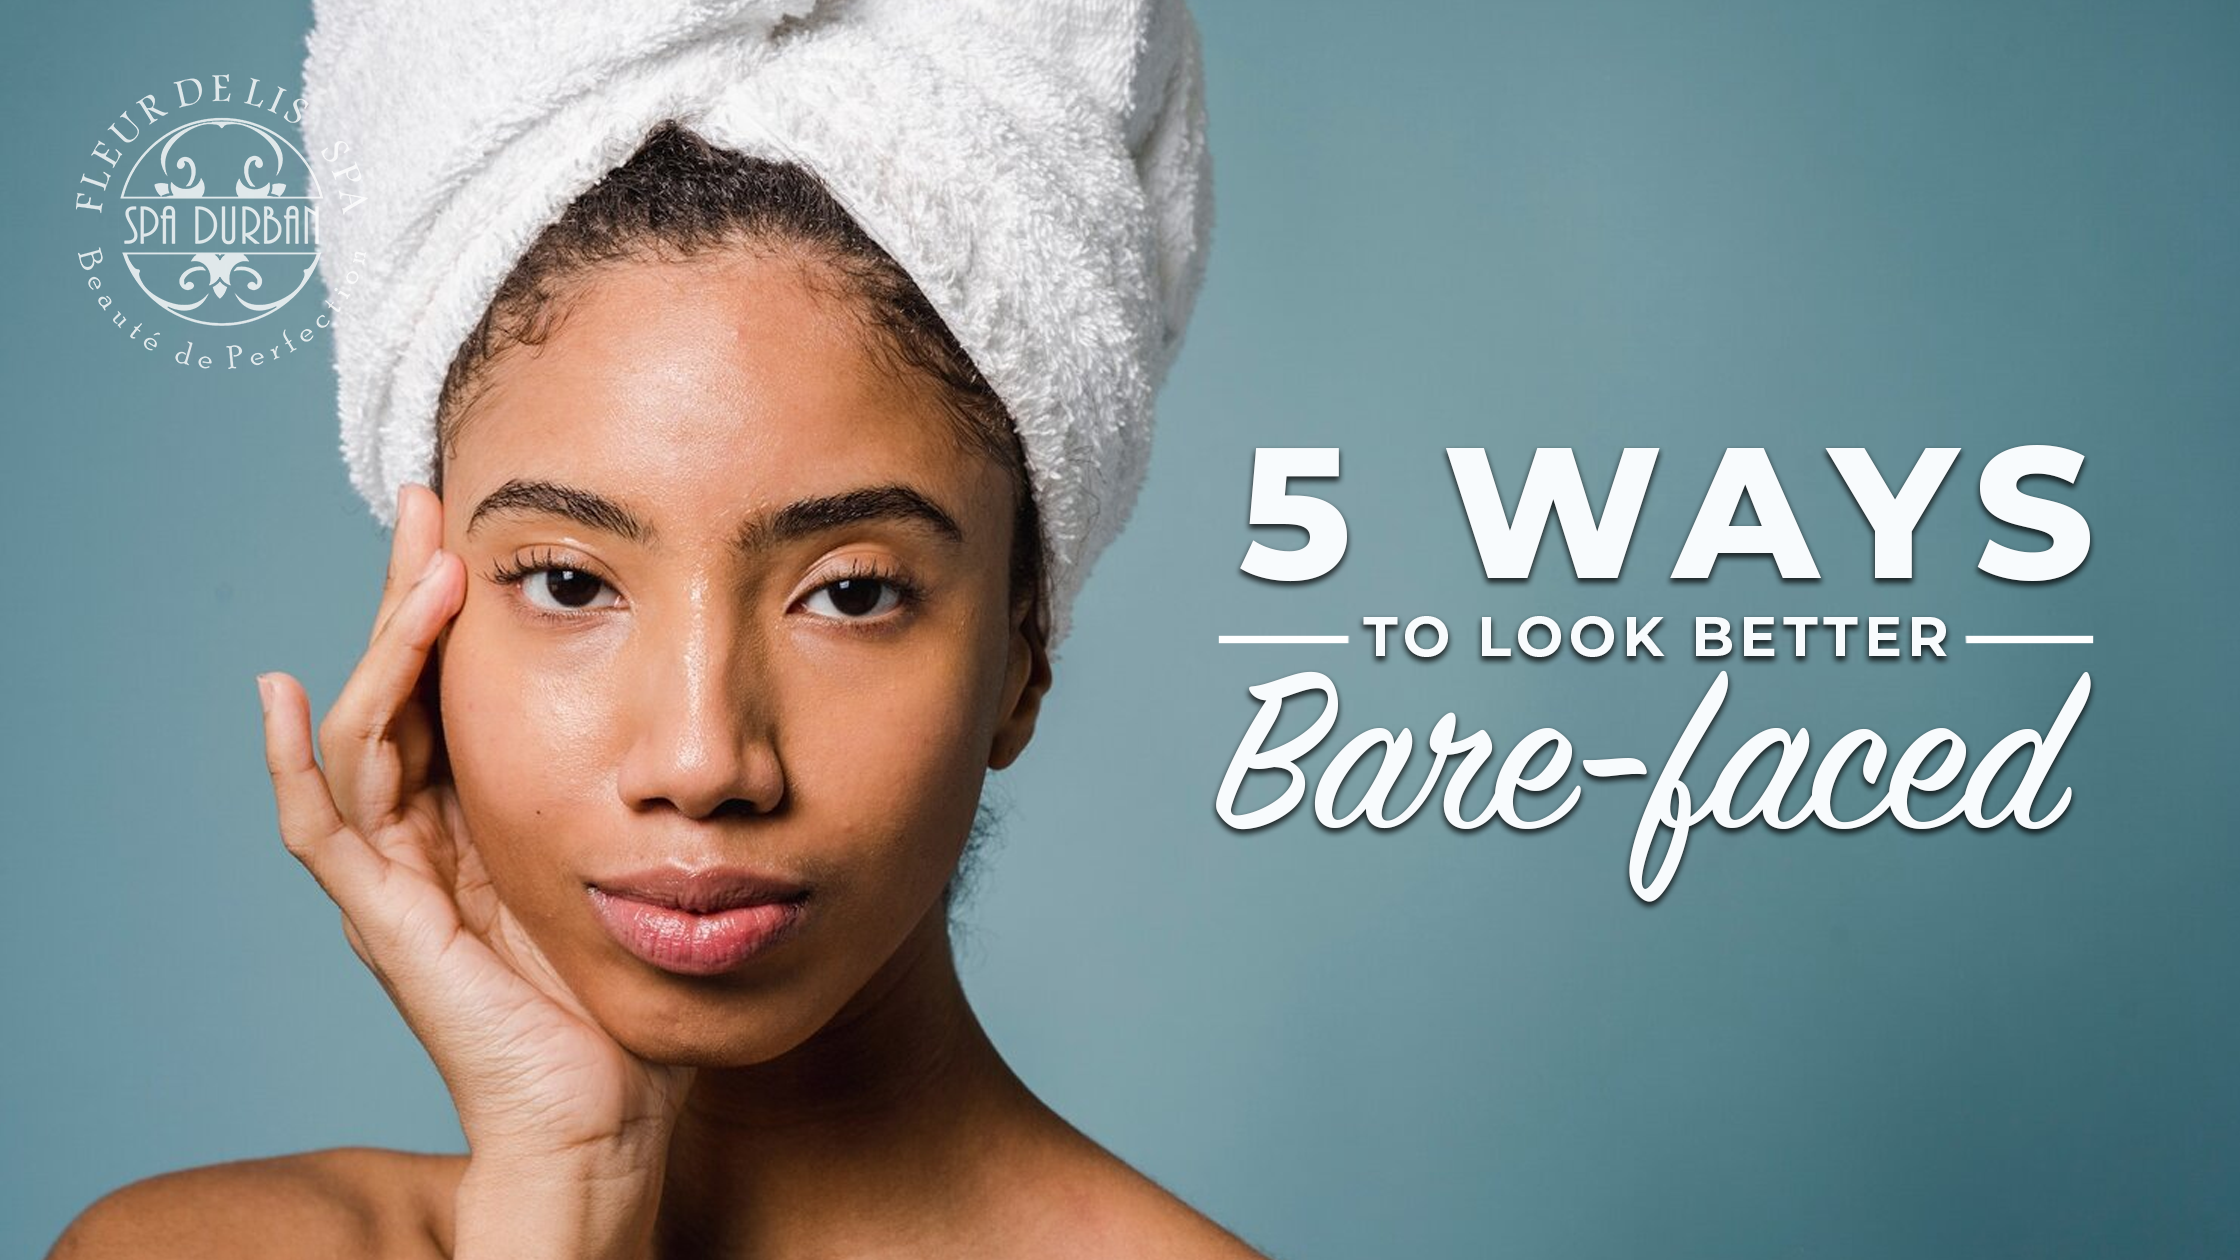 5 Ways to Look Better Bare-faced